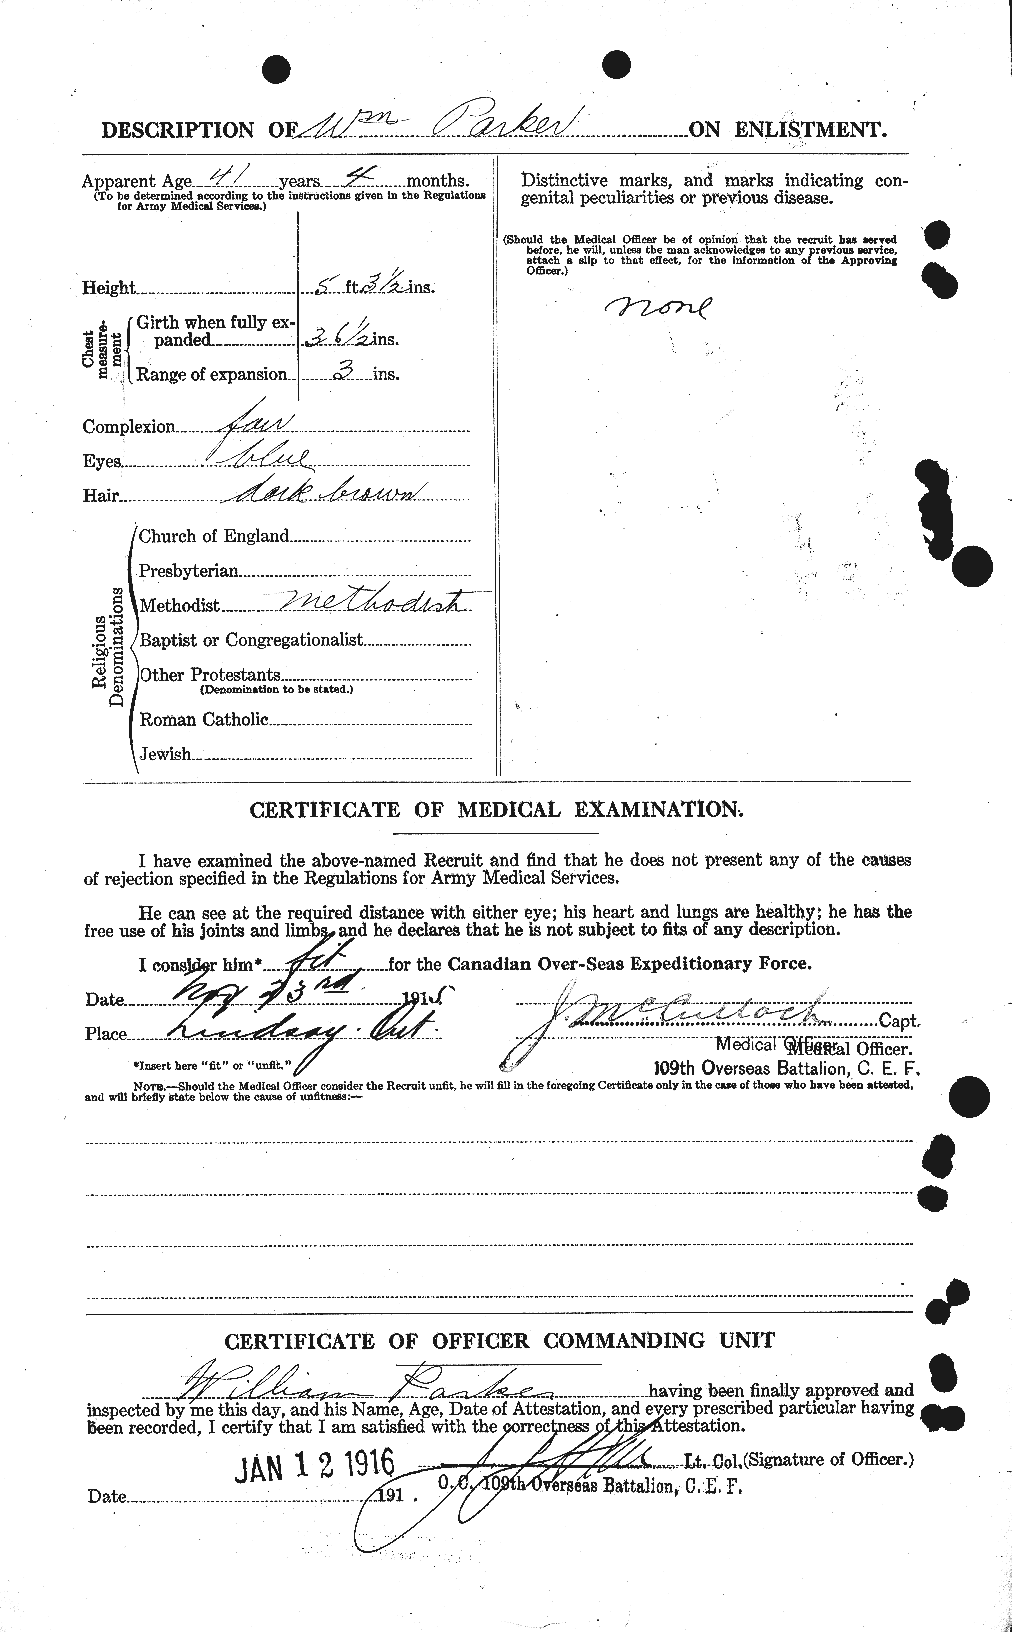 Personnel Records of the First World War - CEF 565719b